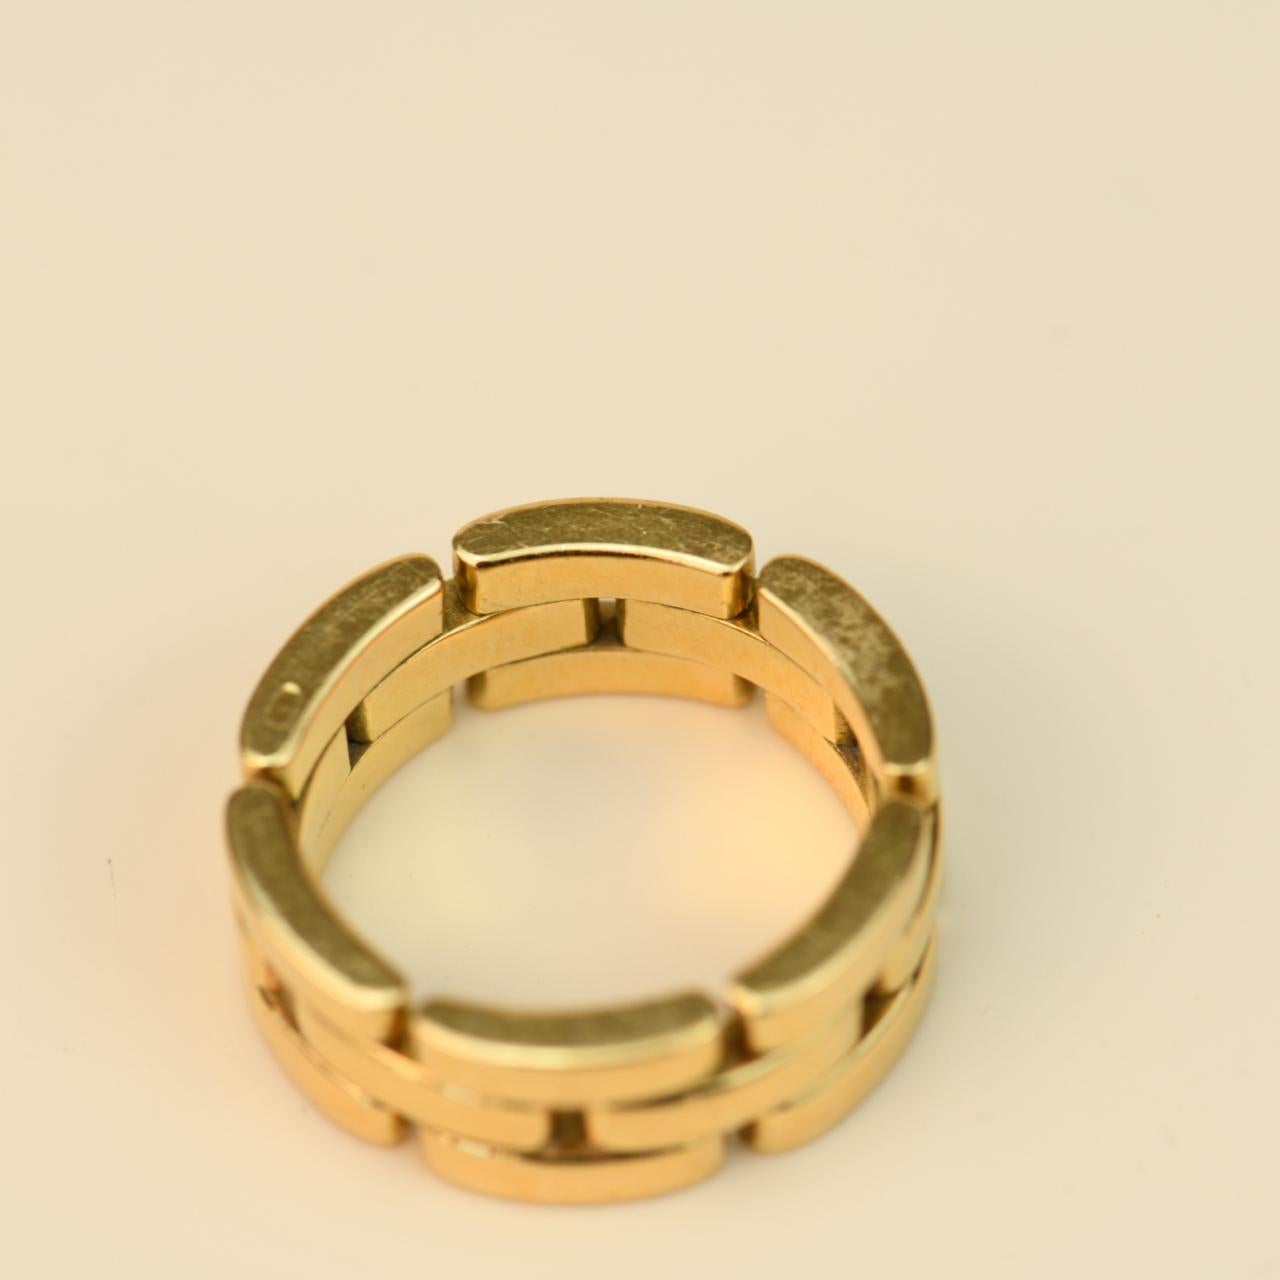 Brilliant Cut Cartier Maillon Panthere Yellow Gold Ring Size 52 For Sale